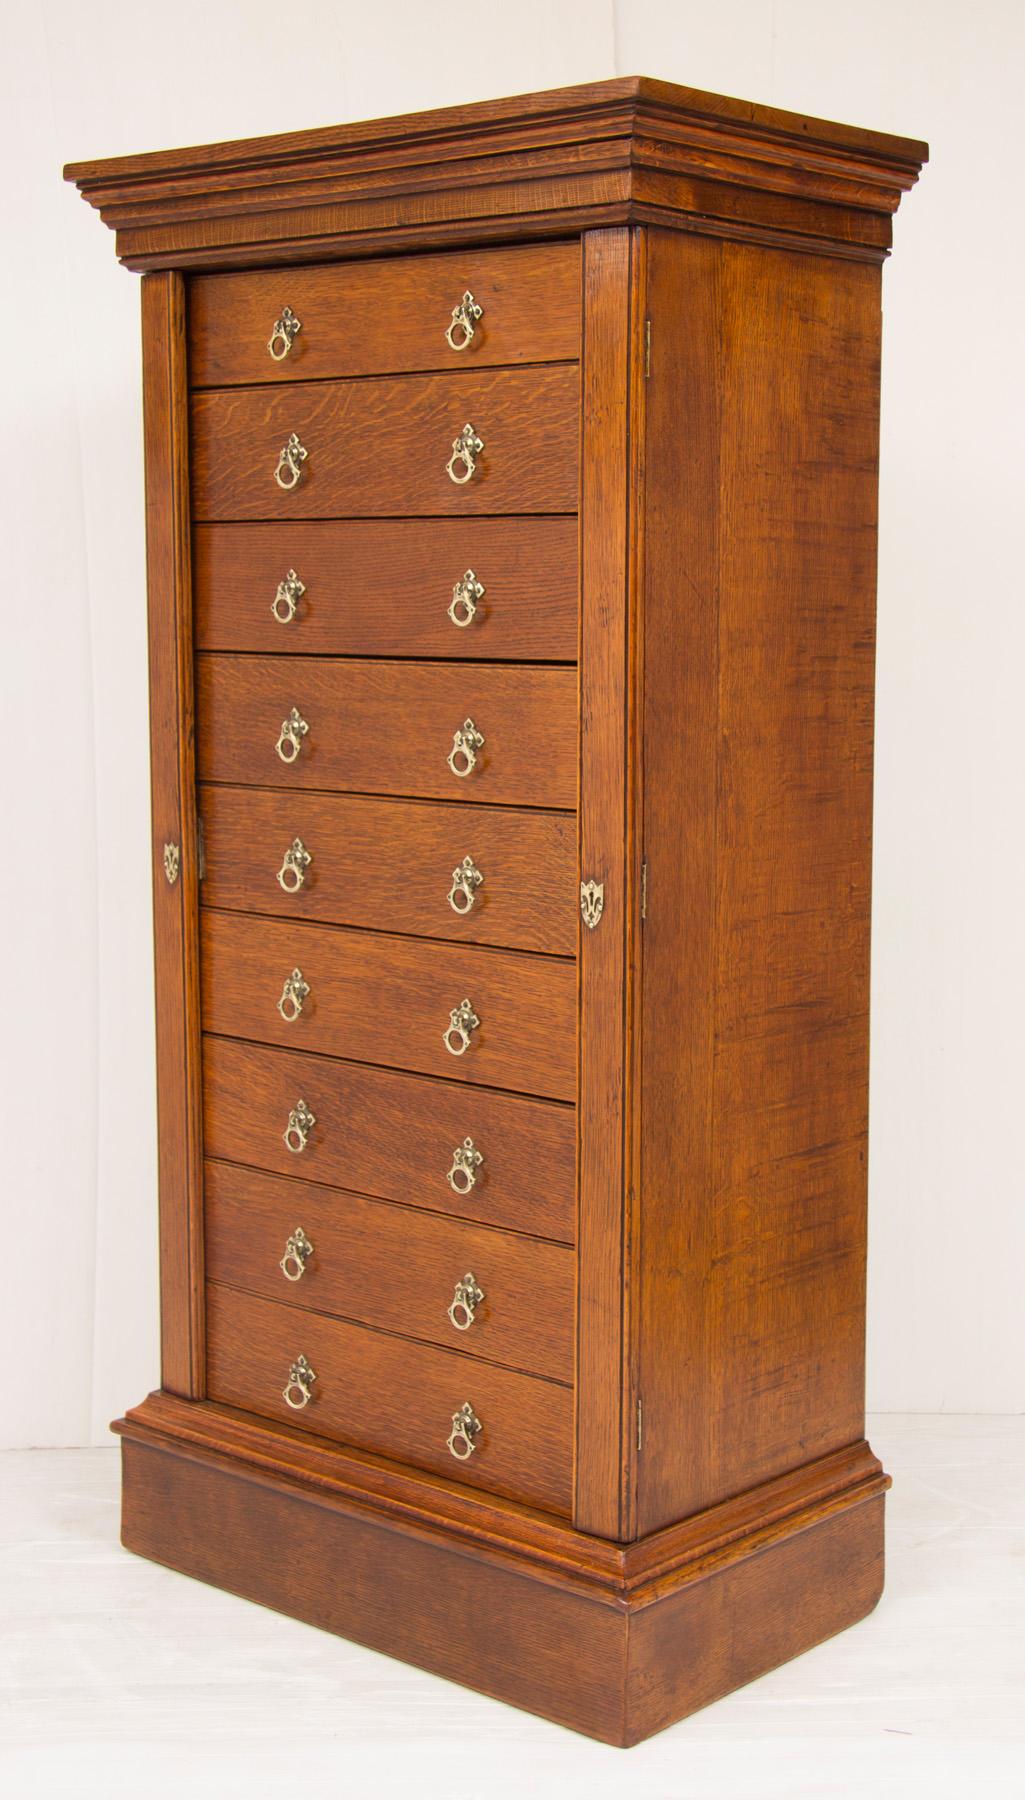 Edwardian Oak Wellington chest of nine drawers with locking bars and secret drawer at back. Working key present and locks working.